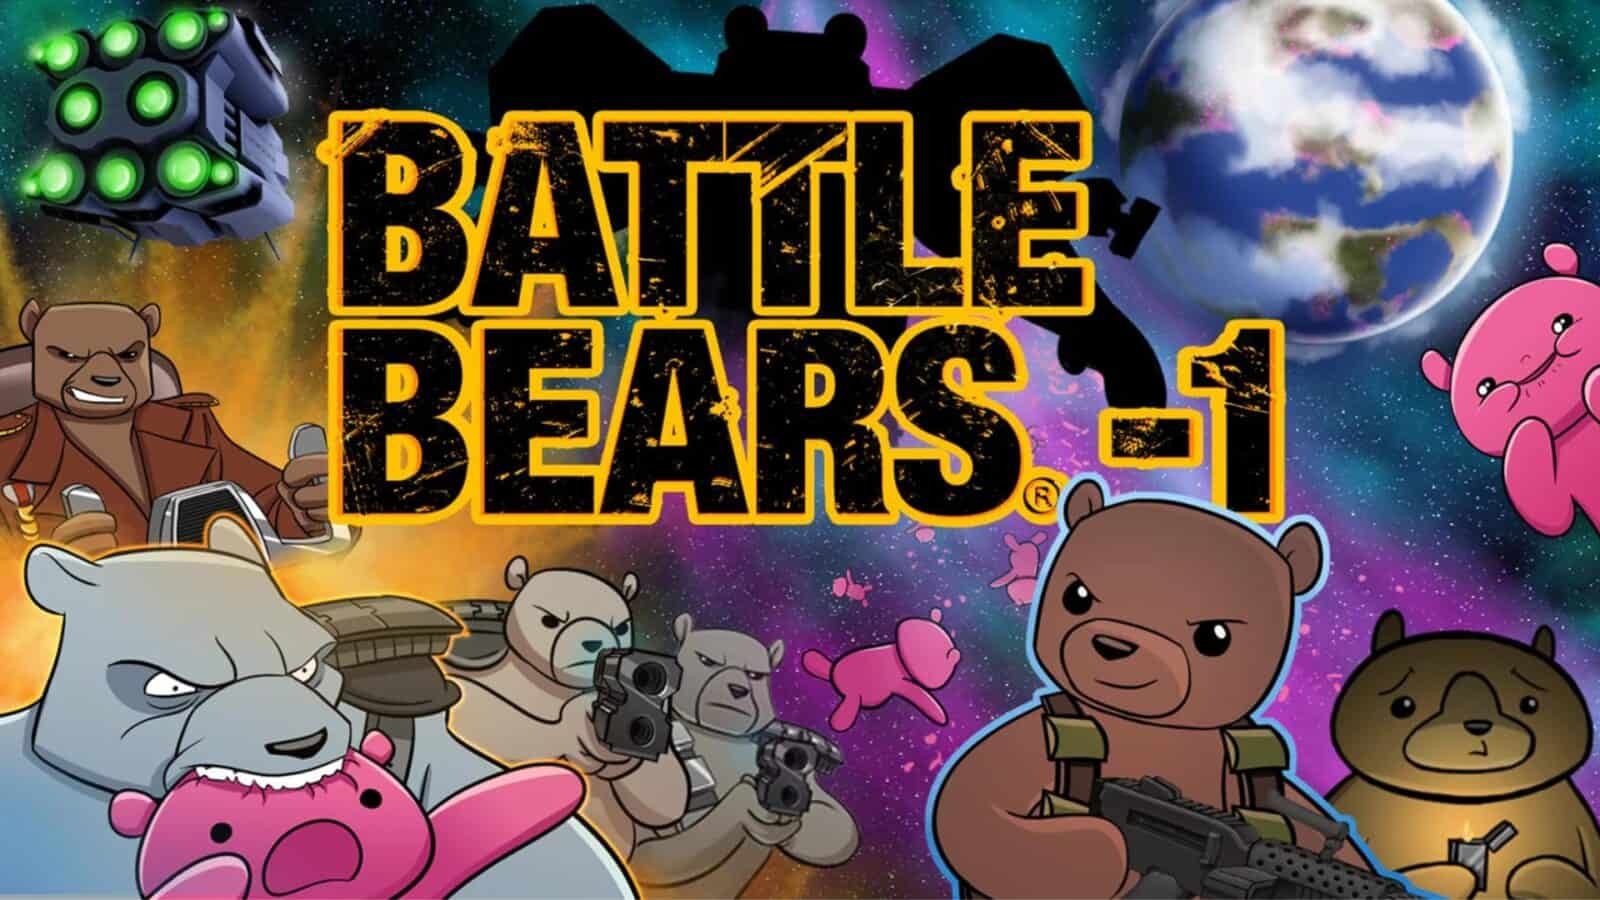 Battle Bears Heroes Expands Reach to Southeast Asia, Australia and New Zealand